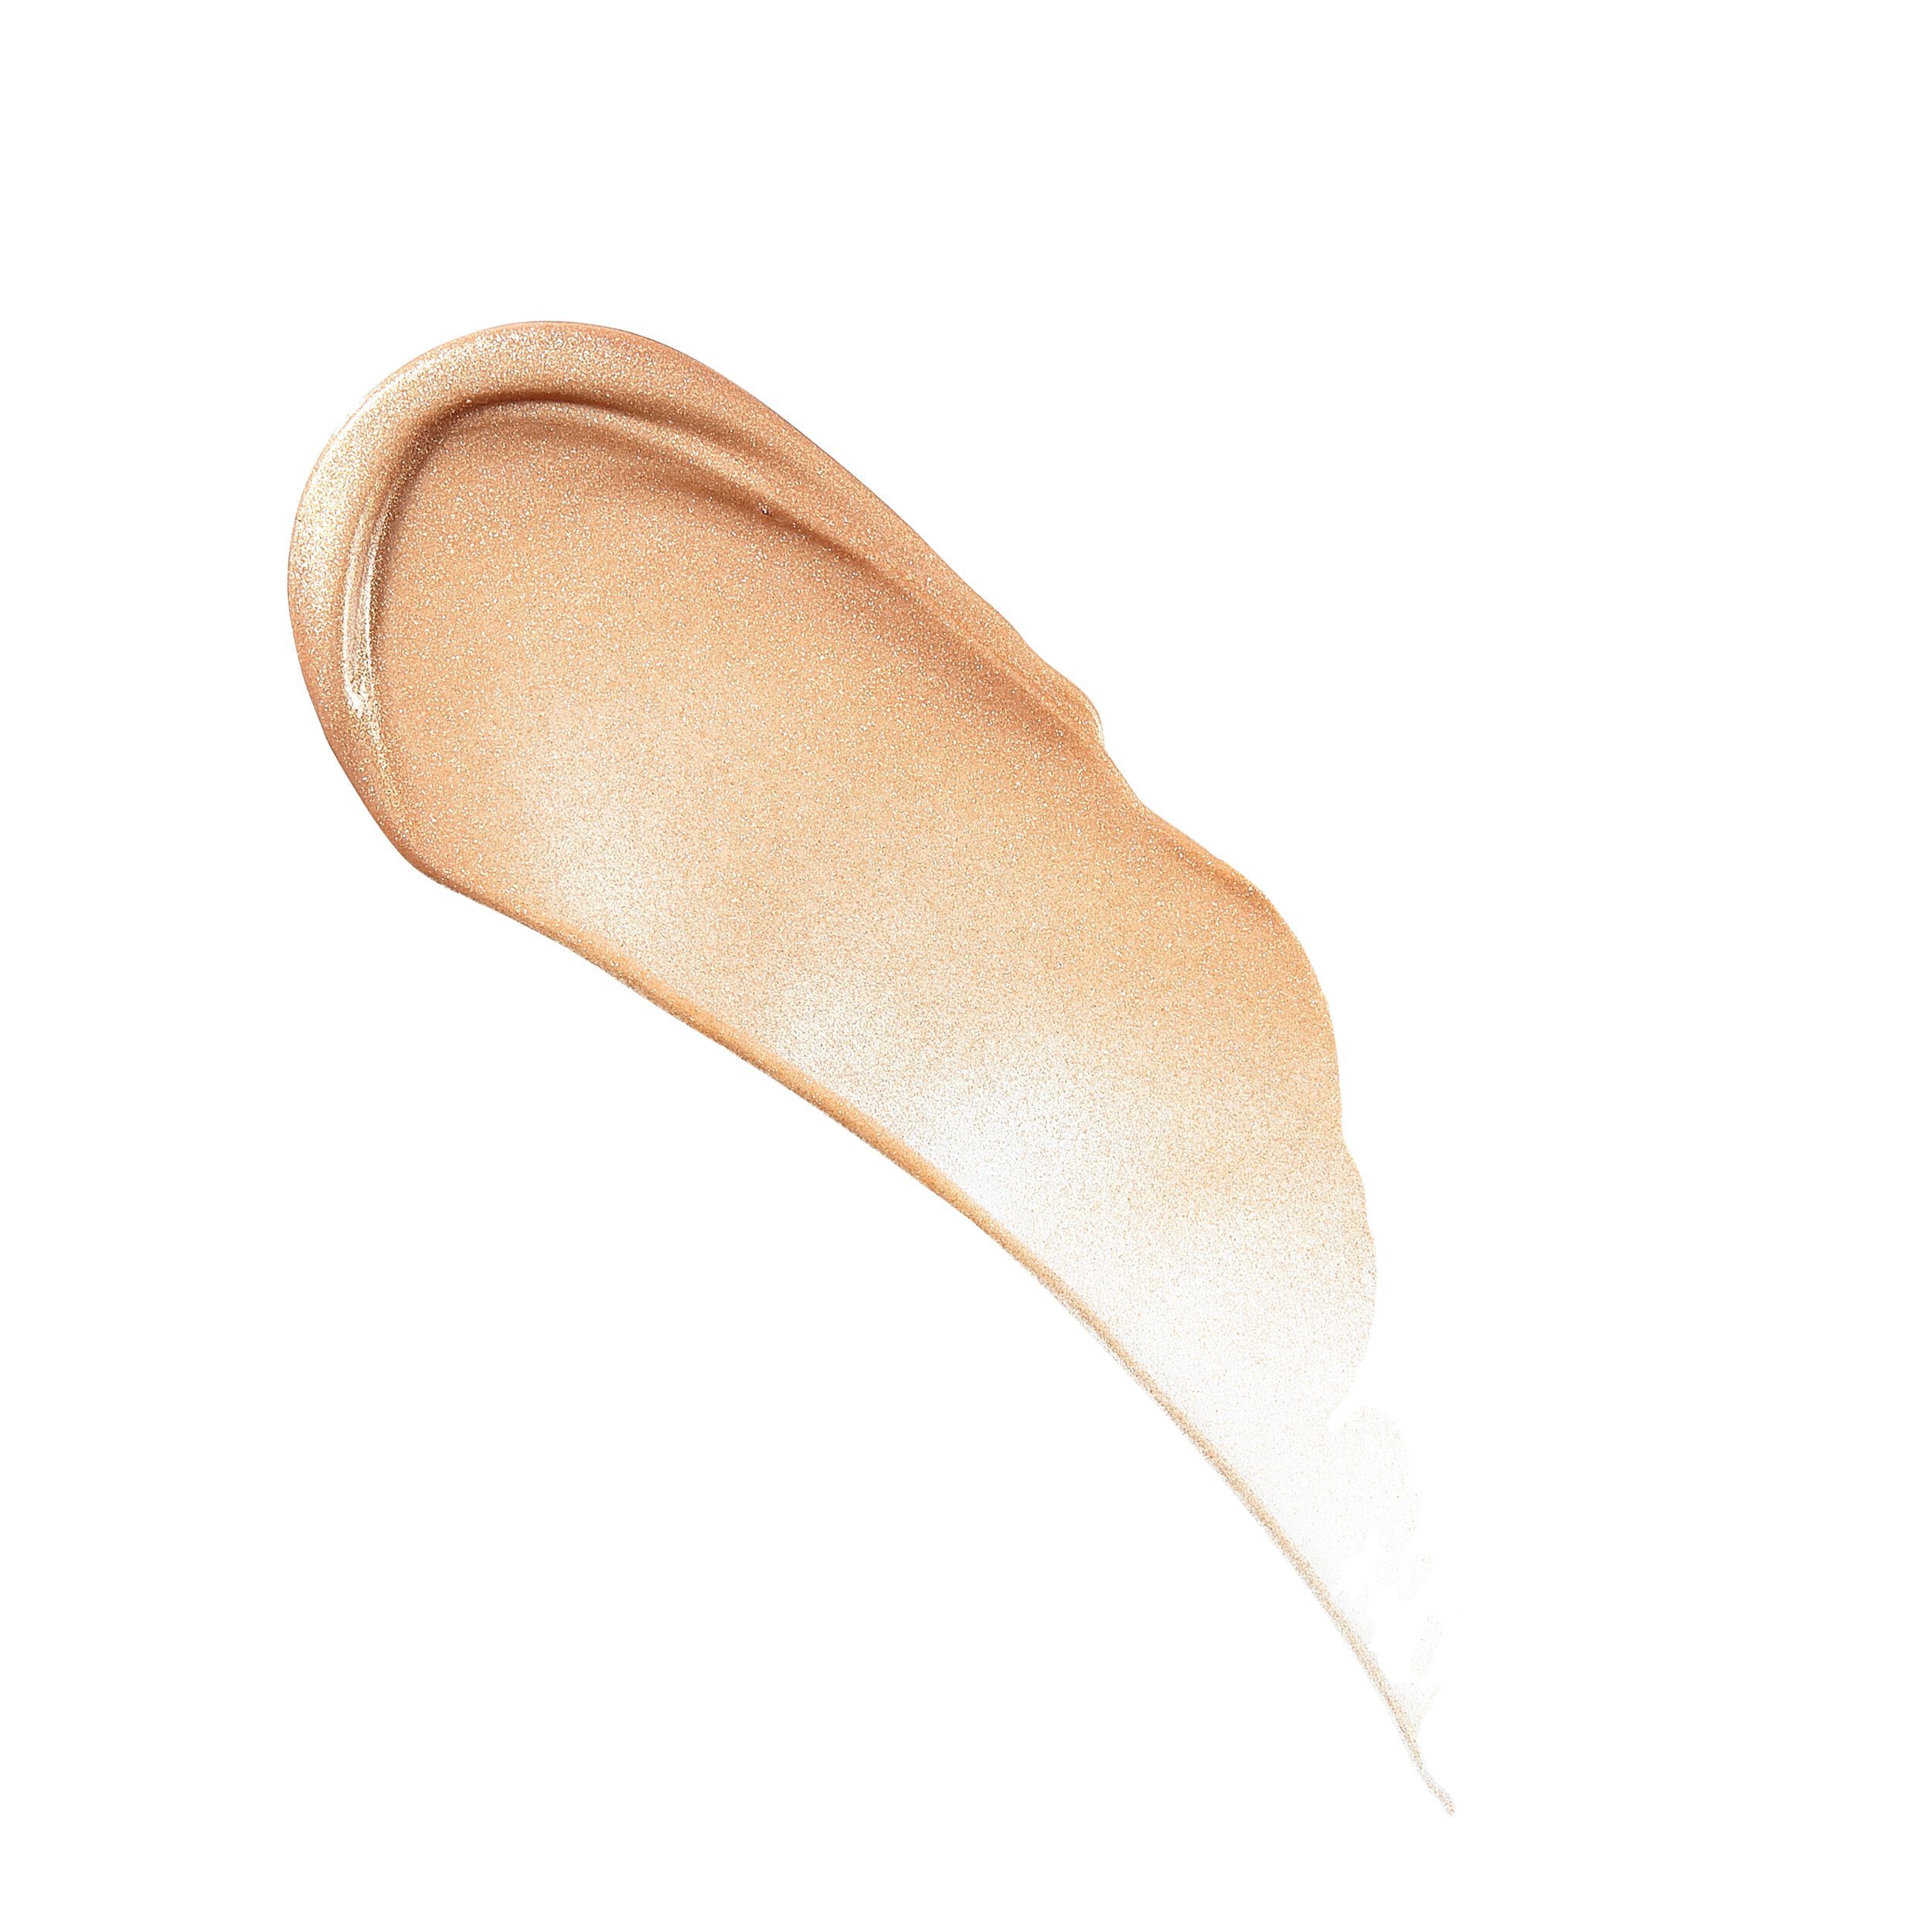 0_Swatches_Face Primer-0016.jpg